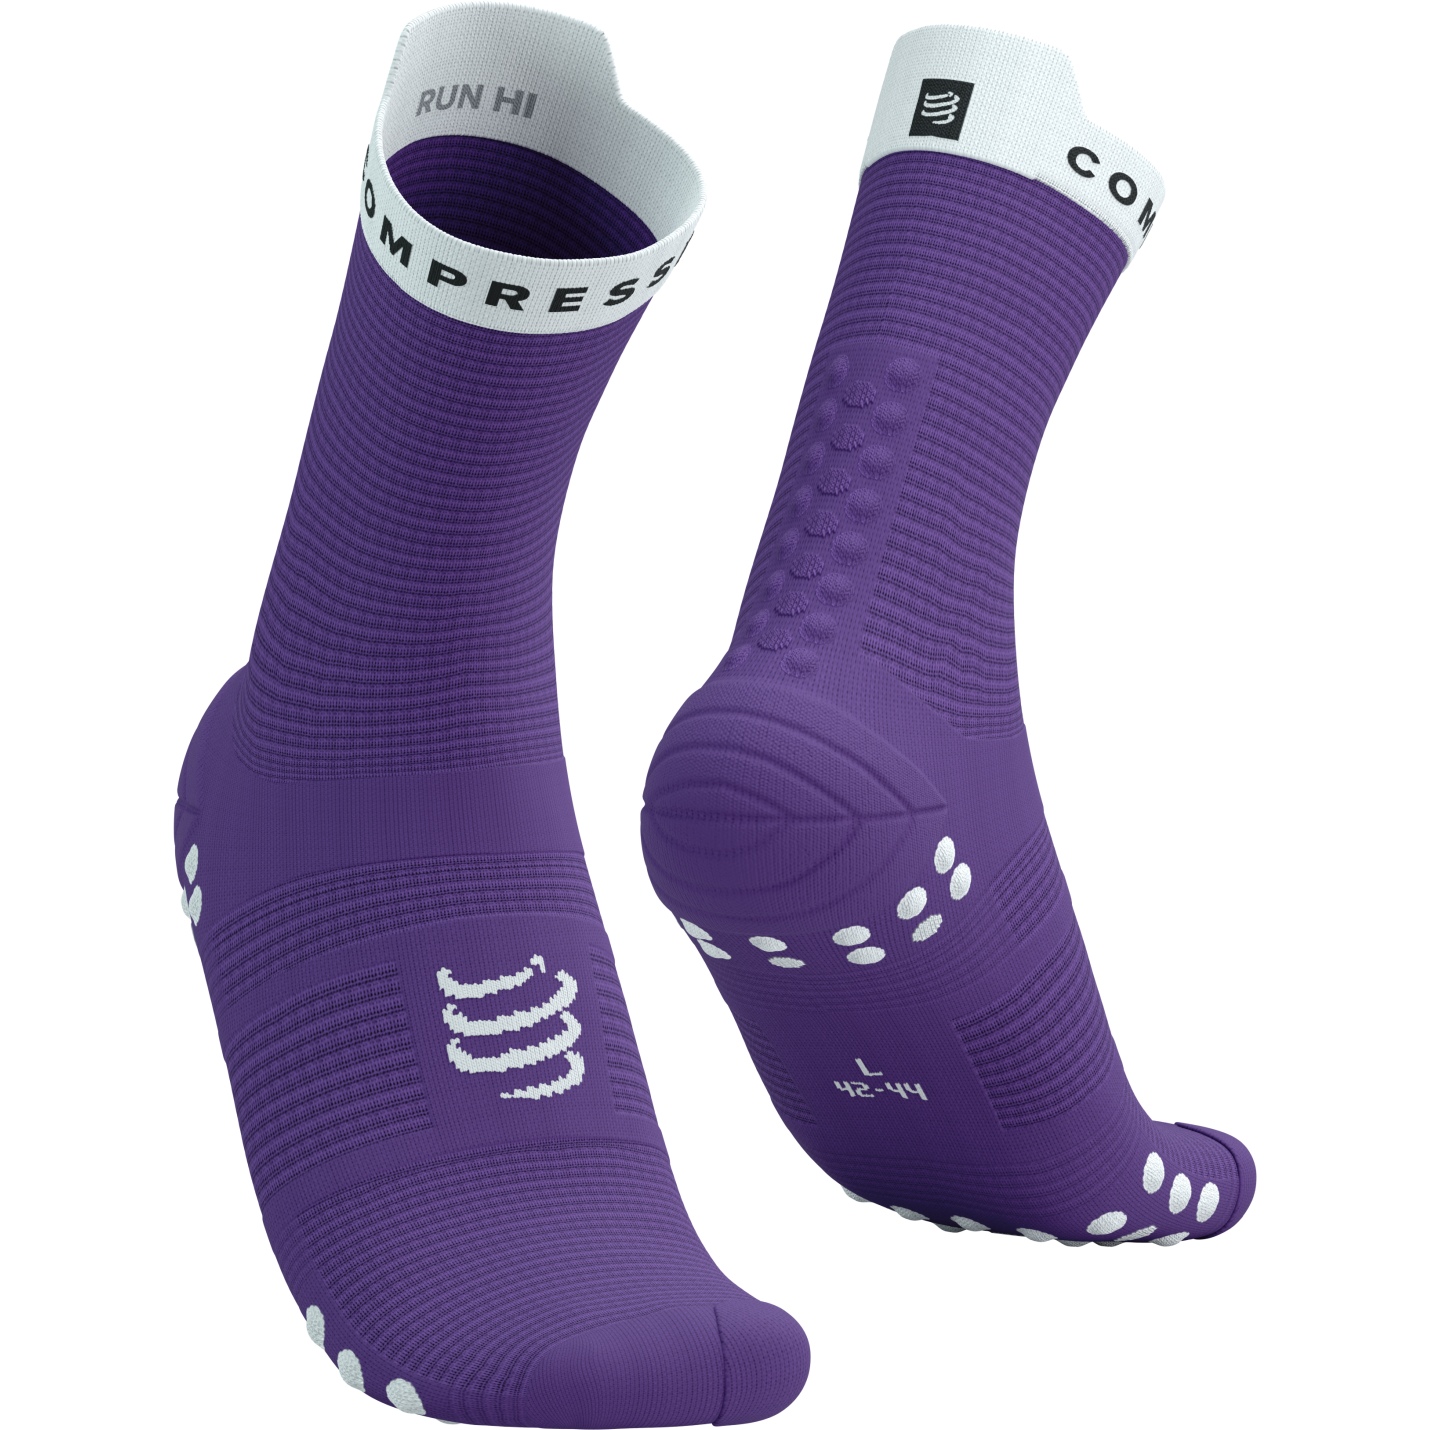 Picture of Compressport Pro Racing Compression Socks v4.0 Run High - royal lilac/white